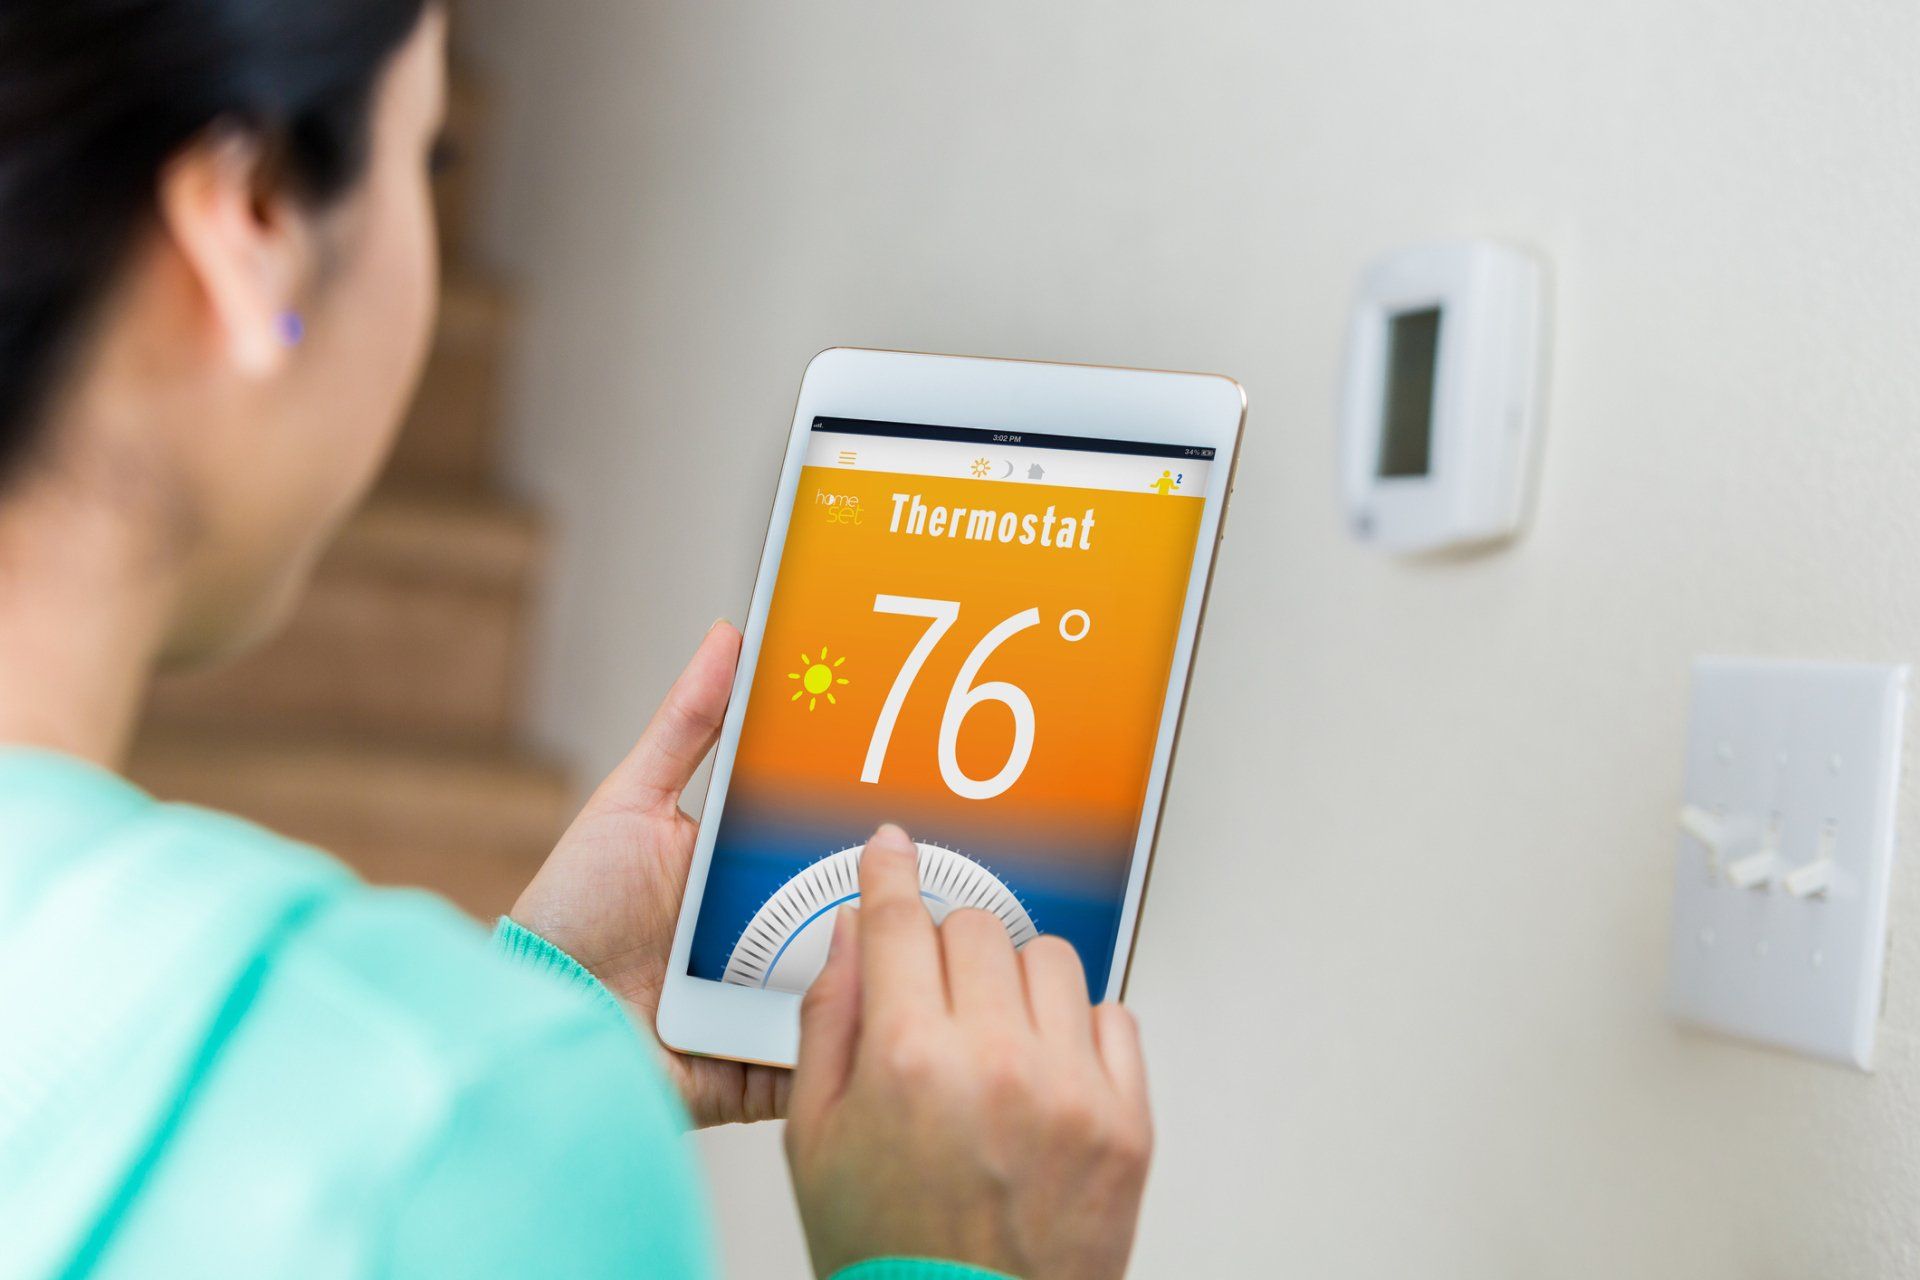 Thermostat control panel to control home's temperature